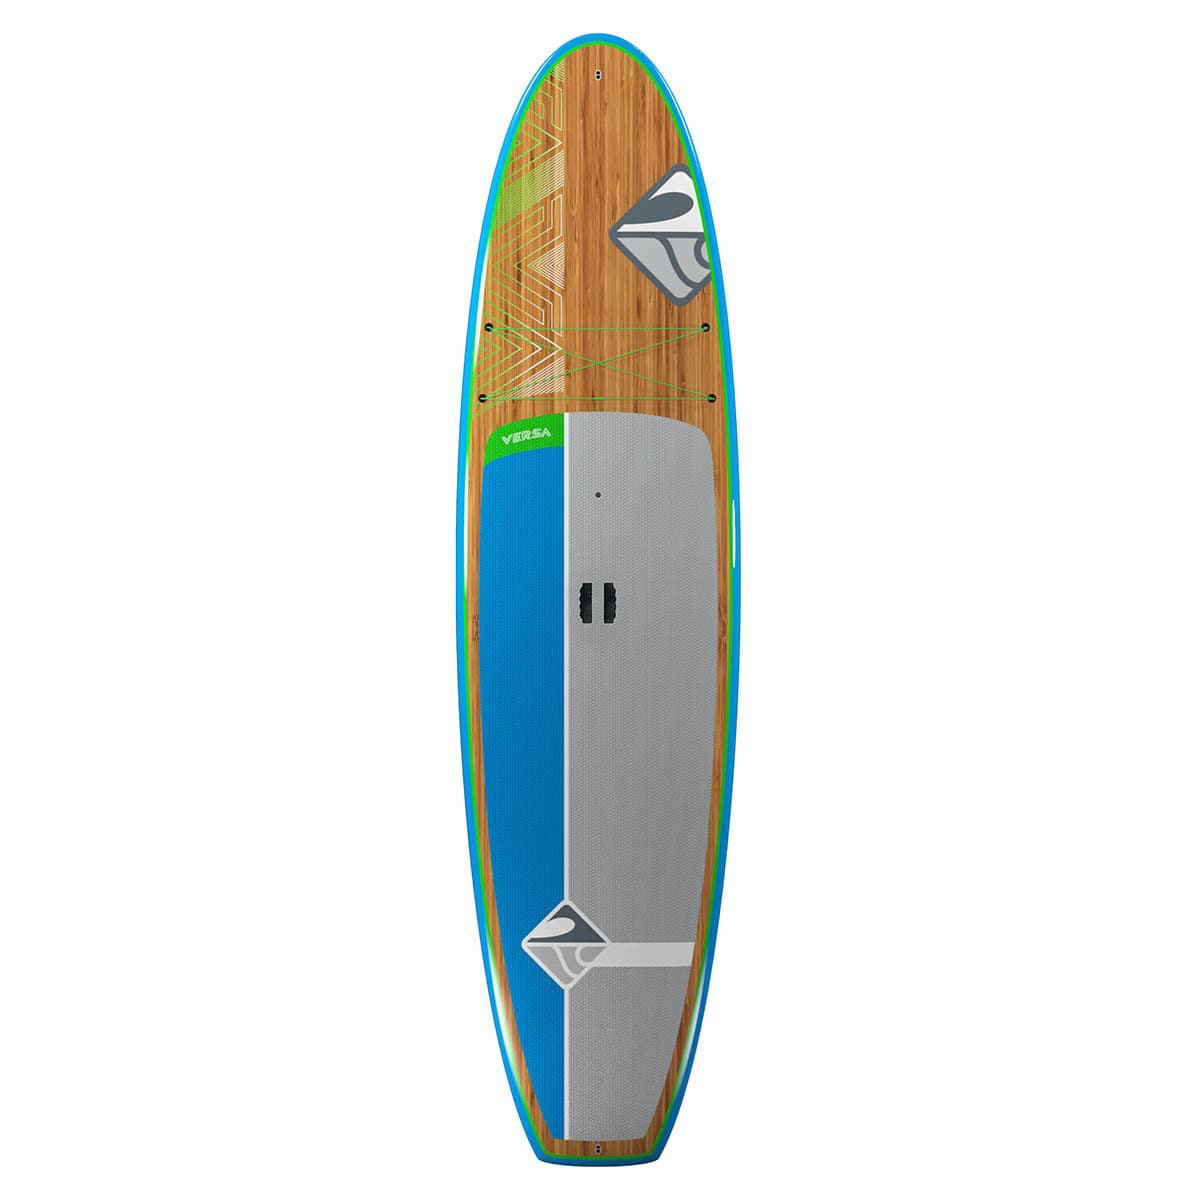 Featuring the Versa 10'6 rigid sup manufactured by Boardworks shown here from one angle.